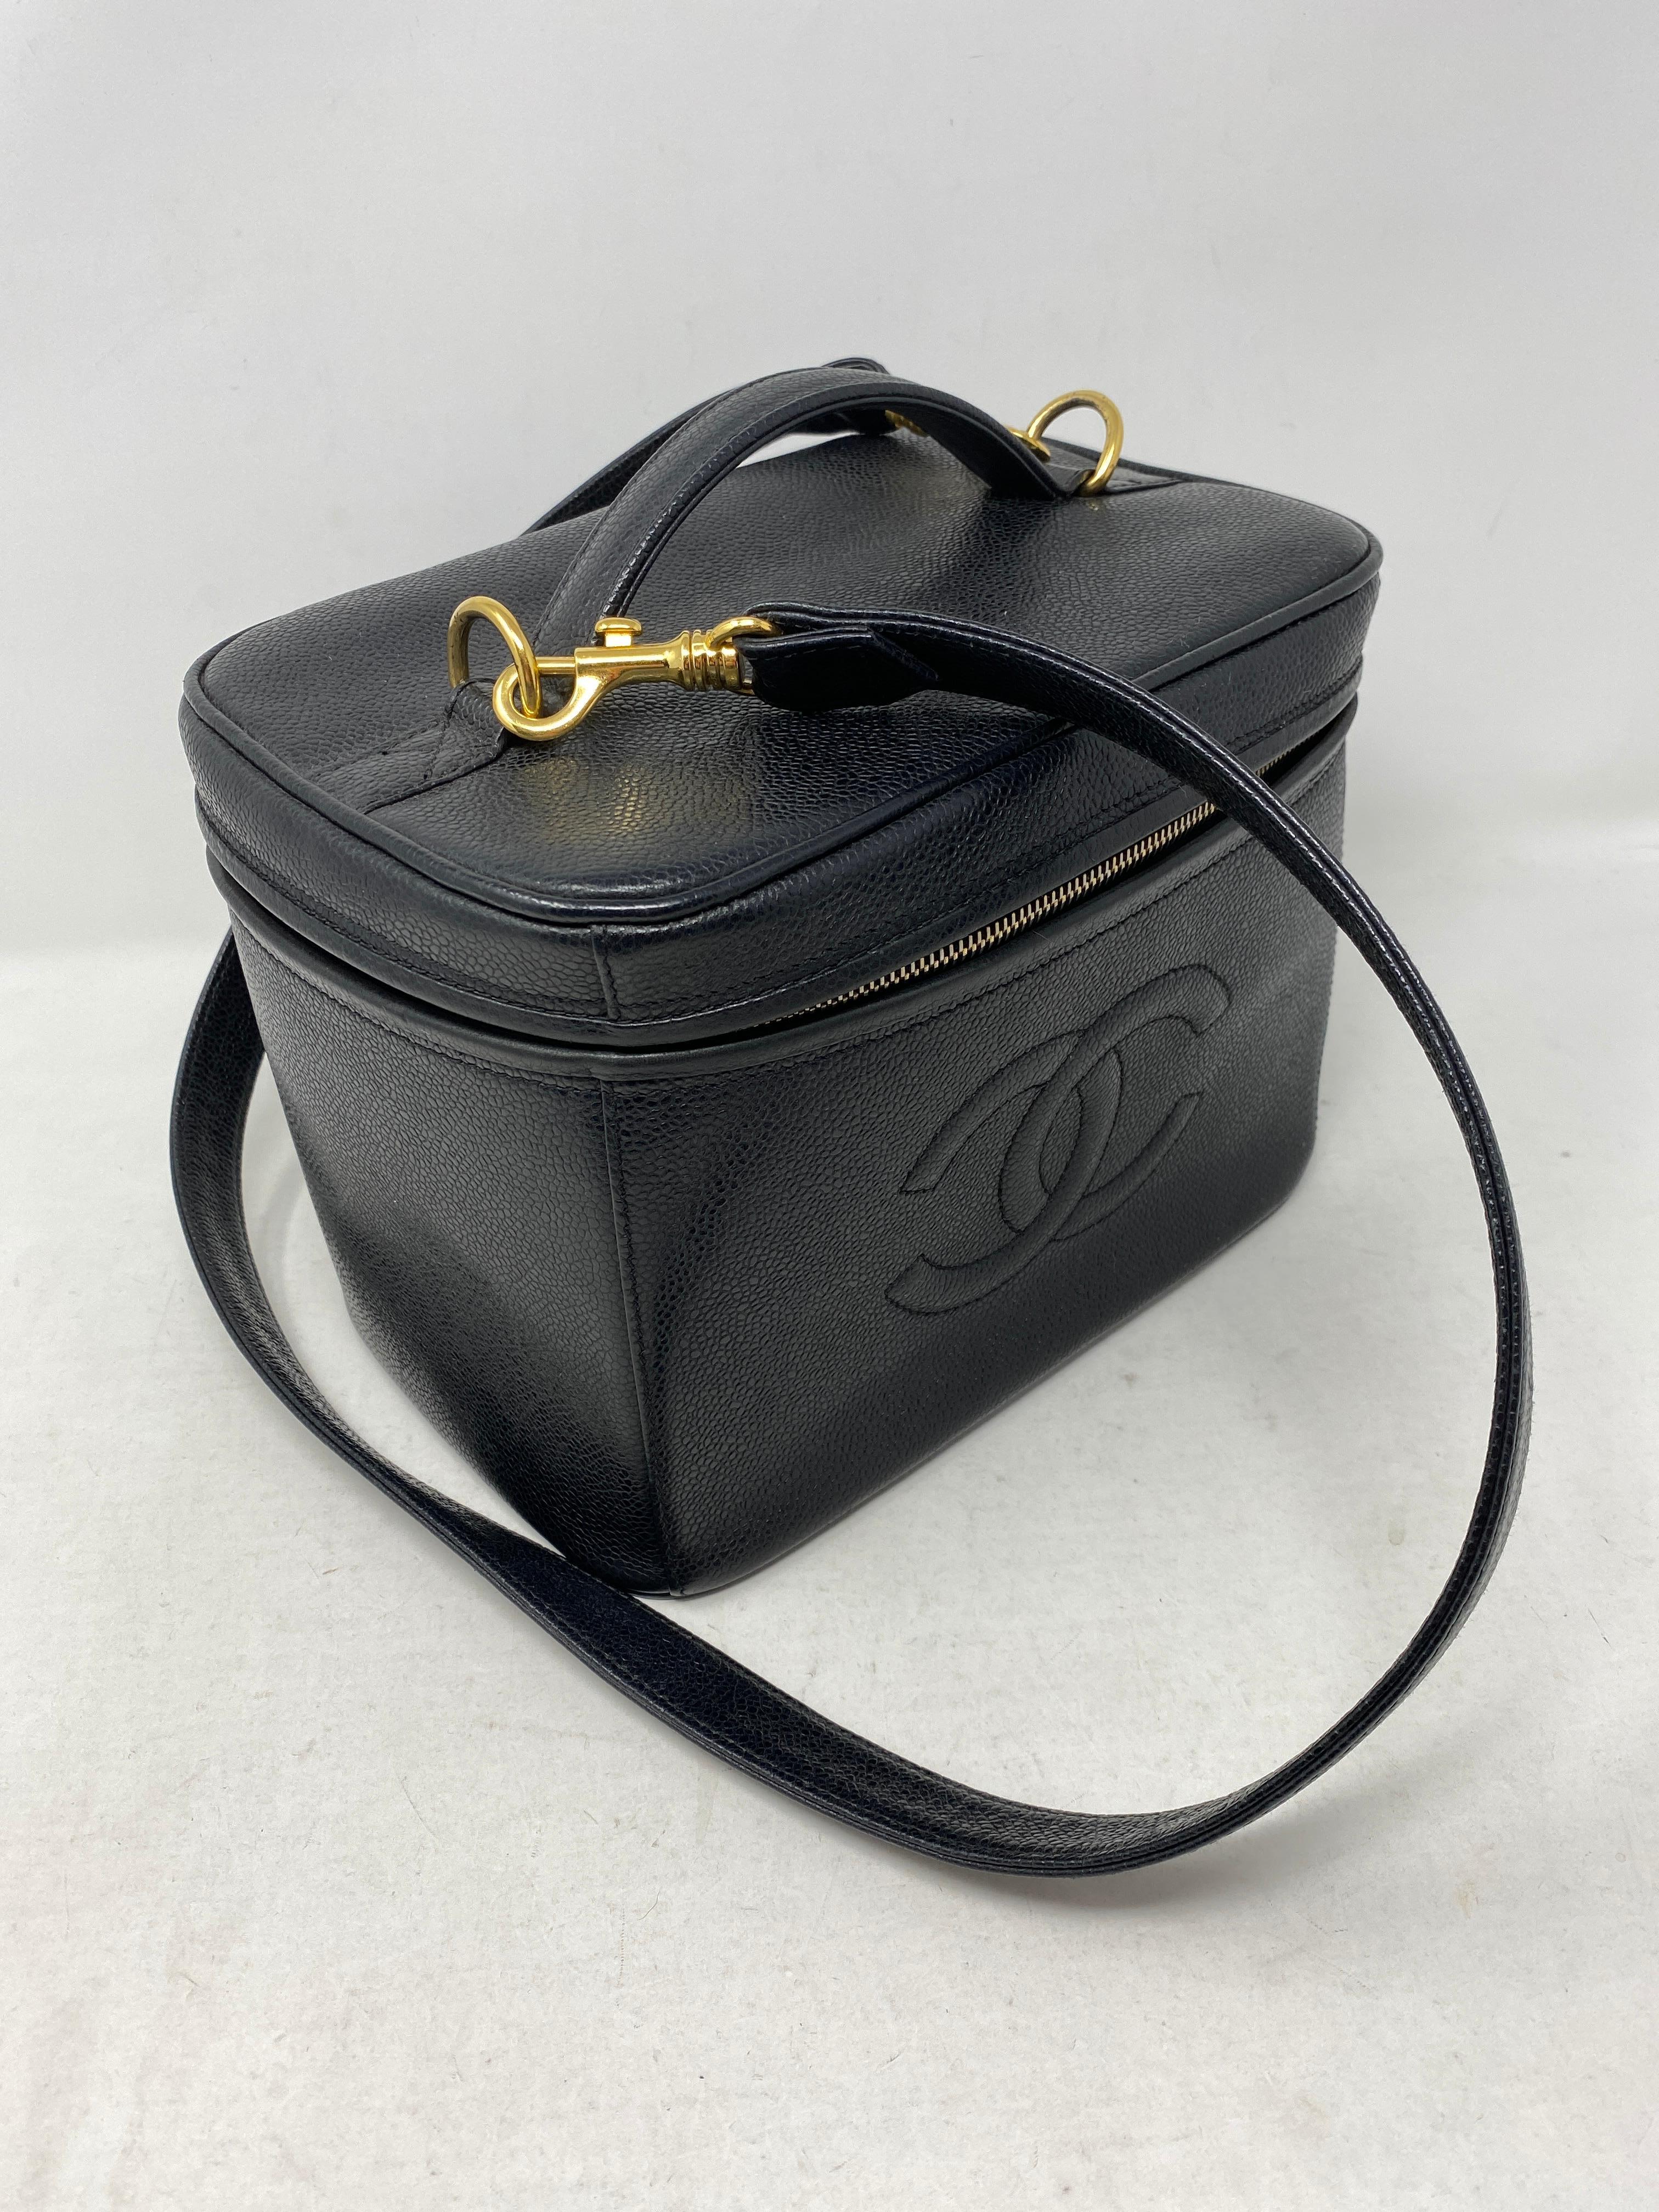 Chanel Cosmetic Case Crossbody Bag. Can be worn as purse or travel bag. Detachable strap. Gold hardware. Caviar leather. Mint condition. Vintage and rare collector's piece. Includes authenticty card. Guaranteed authentic. 